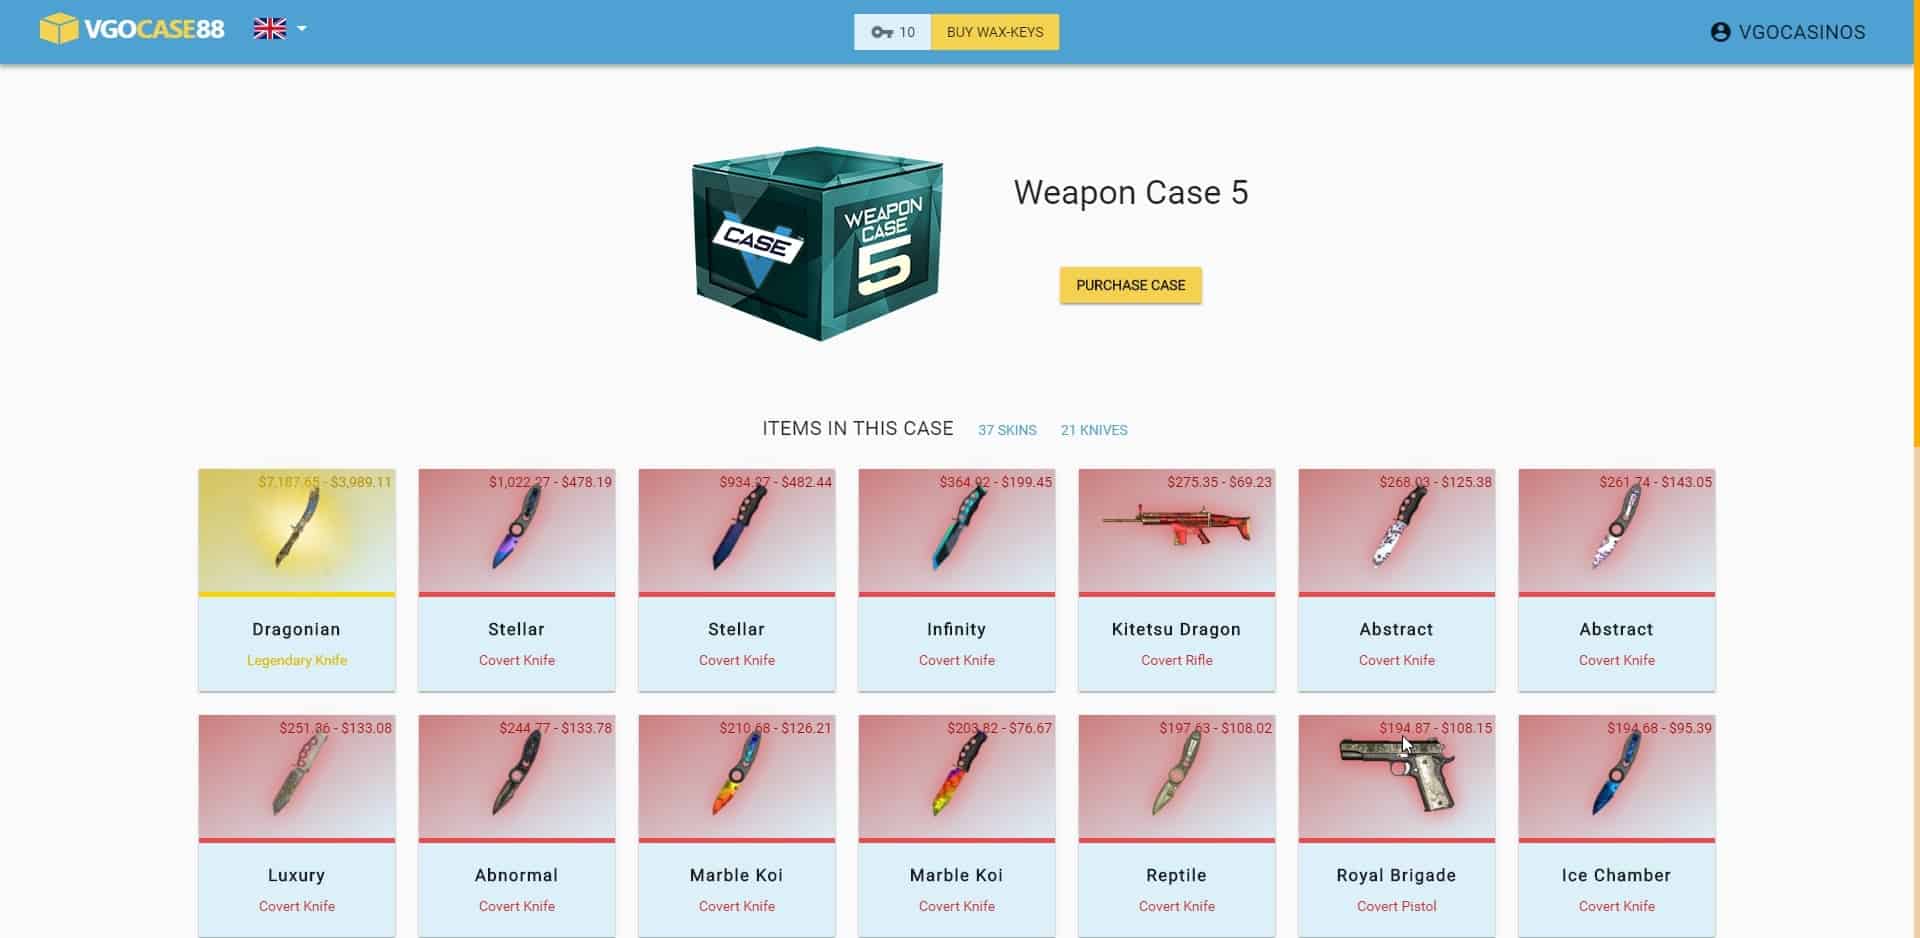 Open Cases at VGO Case 88 and get new skins | VGO Casinos